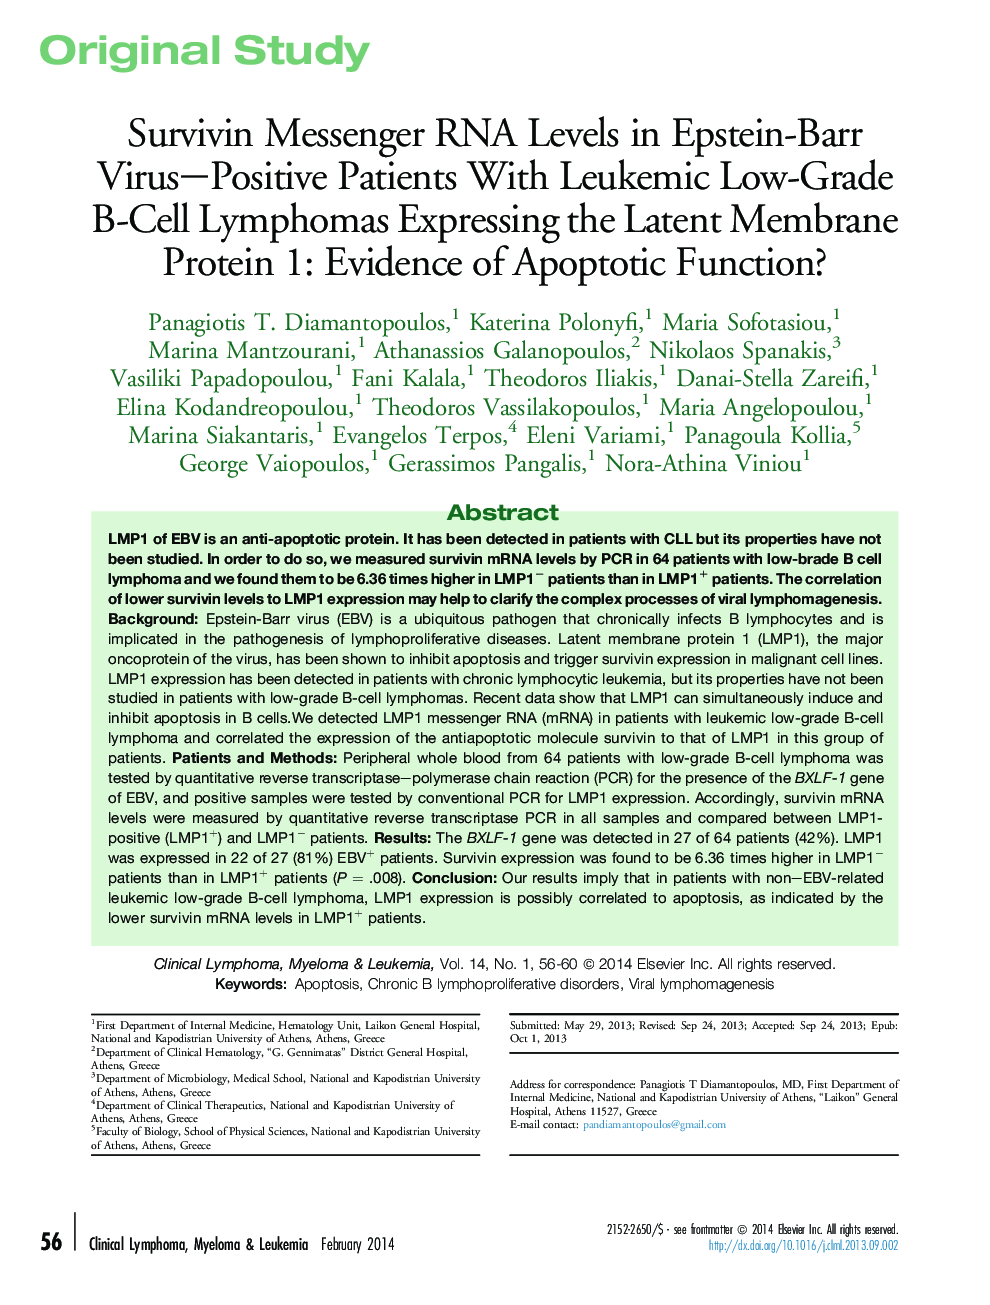 Survivin Messenger RNA Levels in Epstein-Barr Virus-Positive Patients With Leukemic Low-Grade B-Cell Lymphomas Expressing the Latent Membrane Protein 1: Evidence of Apoptotic Function?